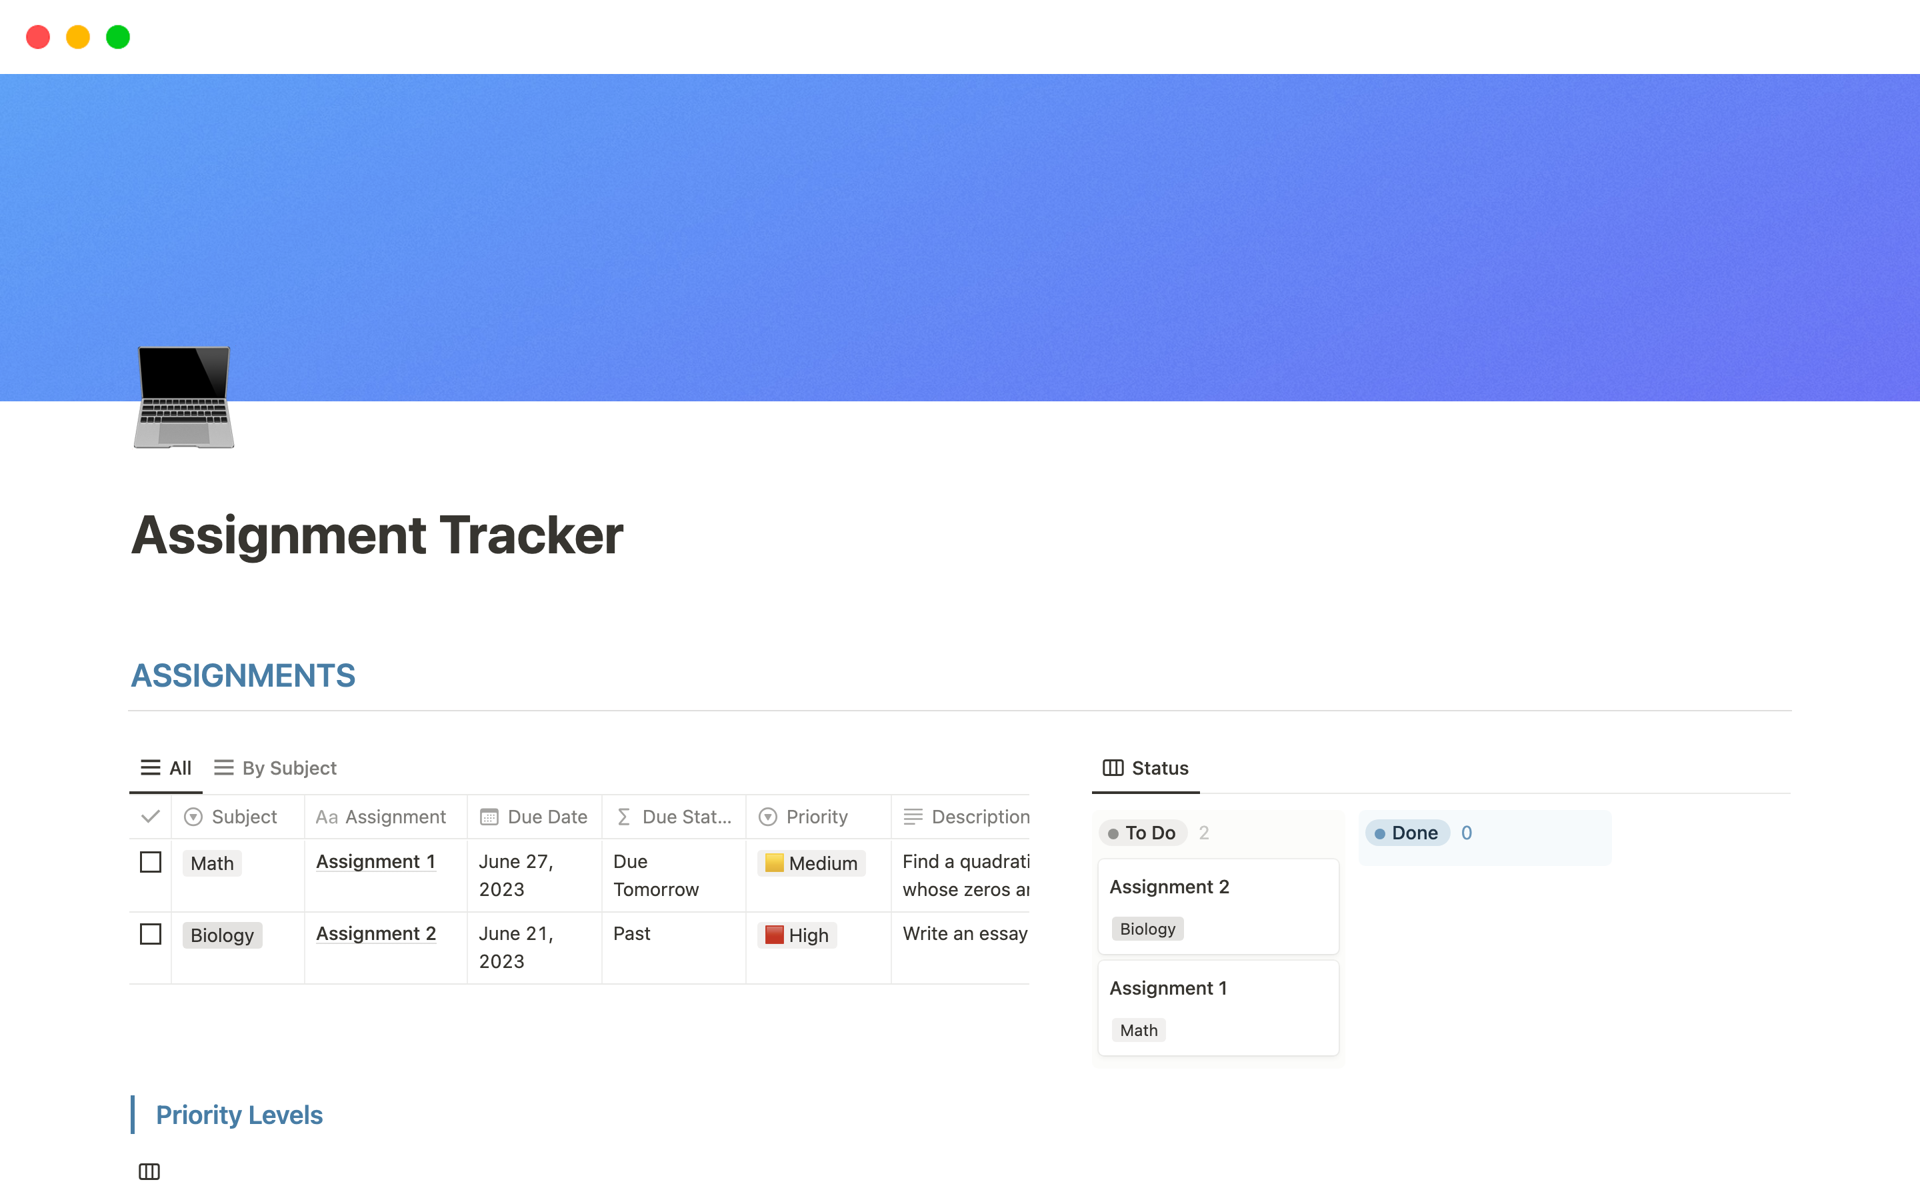 This template simplifies assignment management, allowing you to prioritize them based on priority levels and easily track assignments with due dates.